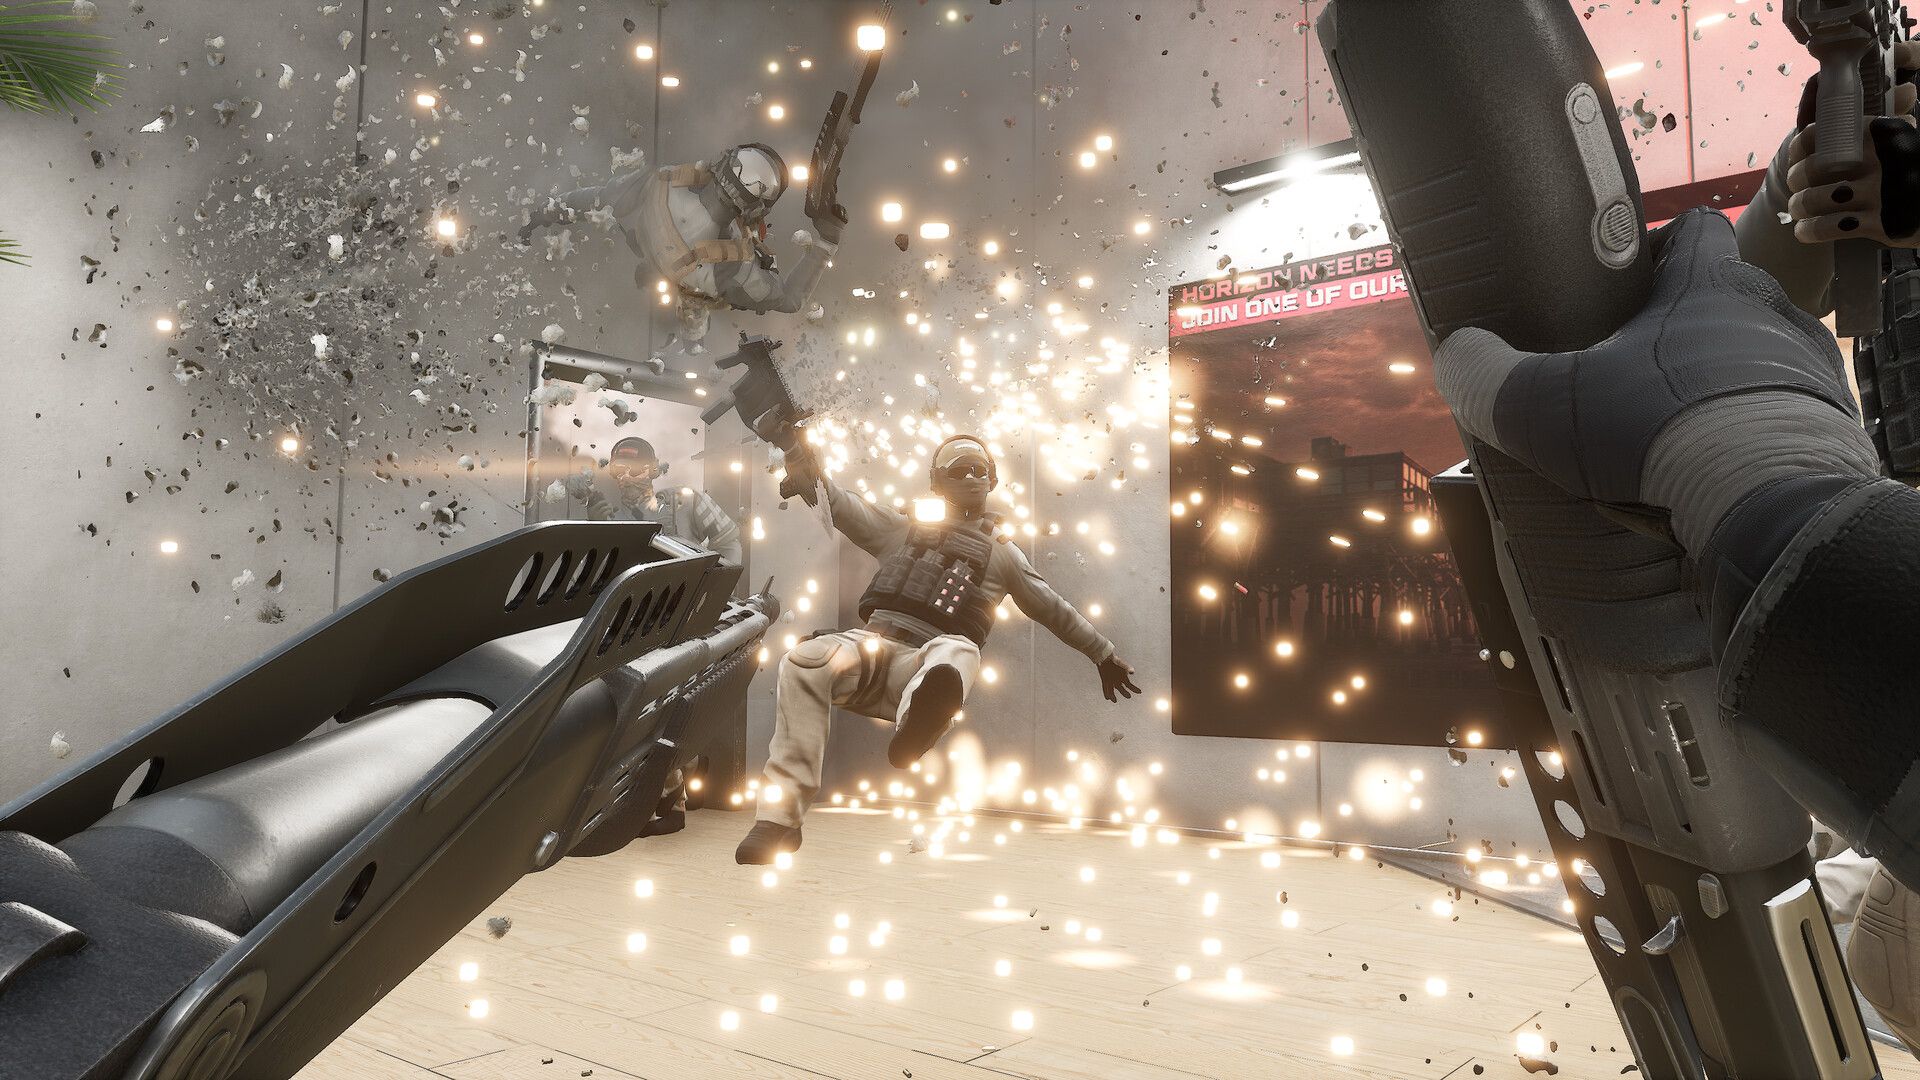 The player character shoots a soldier, knocking him back in a spray of sparks.